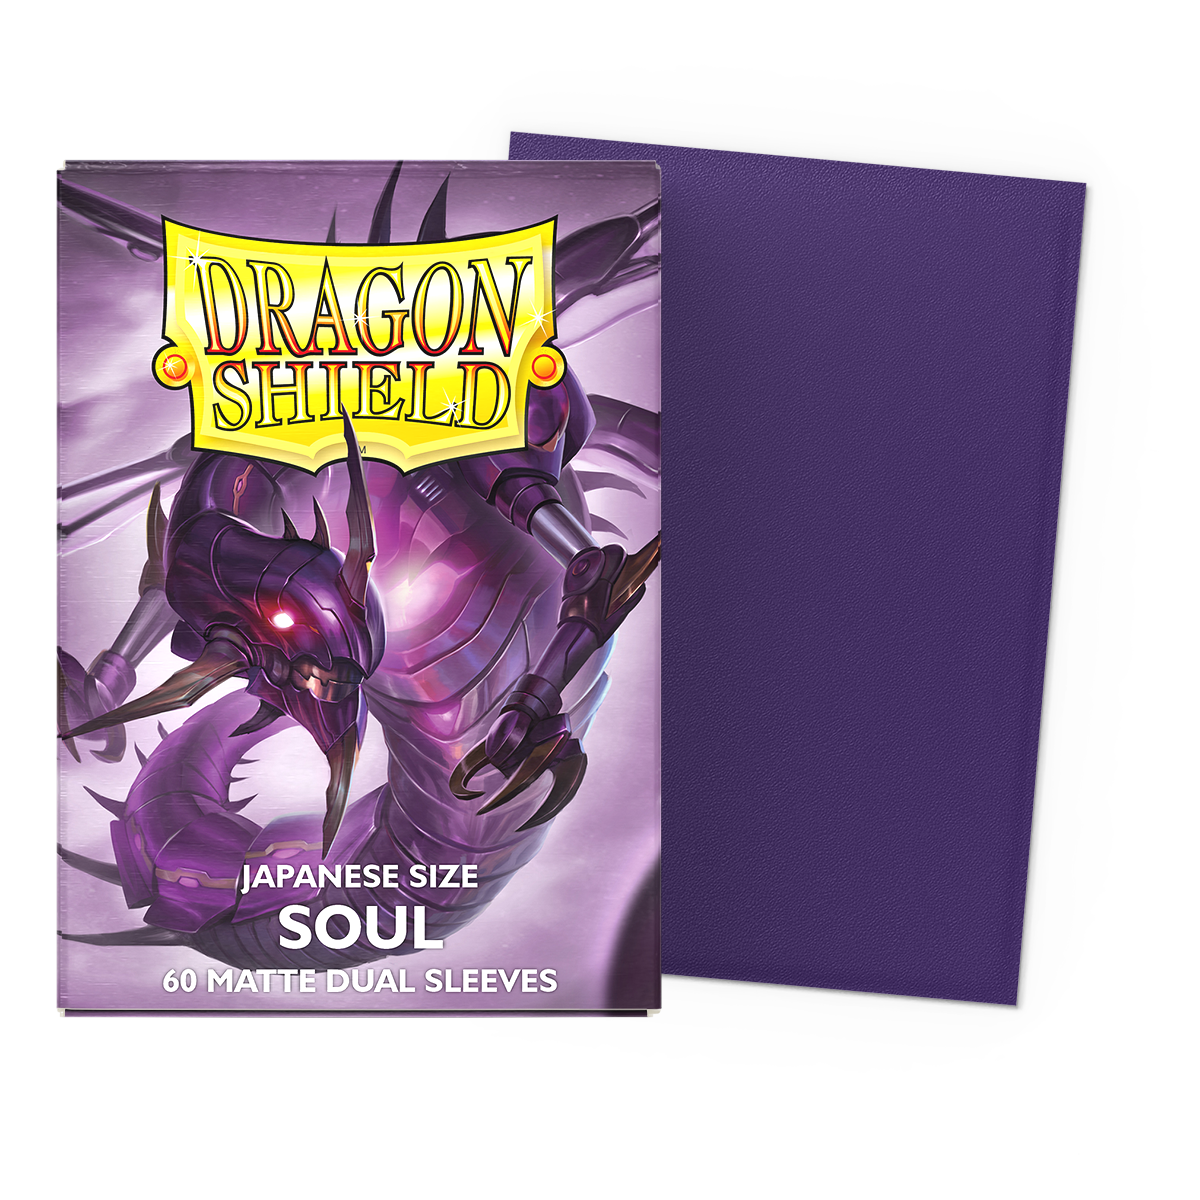 Dragon Shield on X: Did you know that Dragon Shield provides three  different types of double-sleeving for your Japanese size cards (Yugioh,  Cardfight, etc.)? Find your favorite way to protect your cards